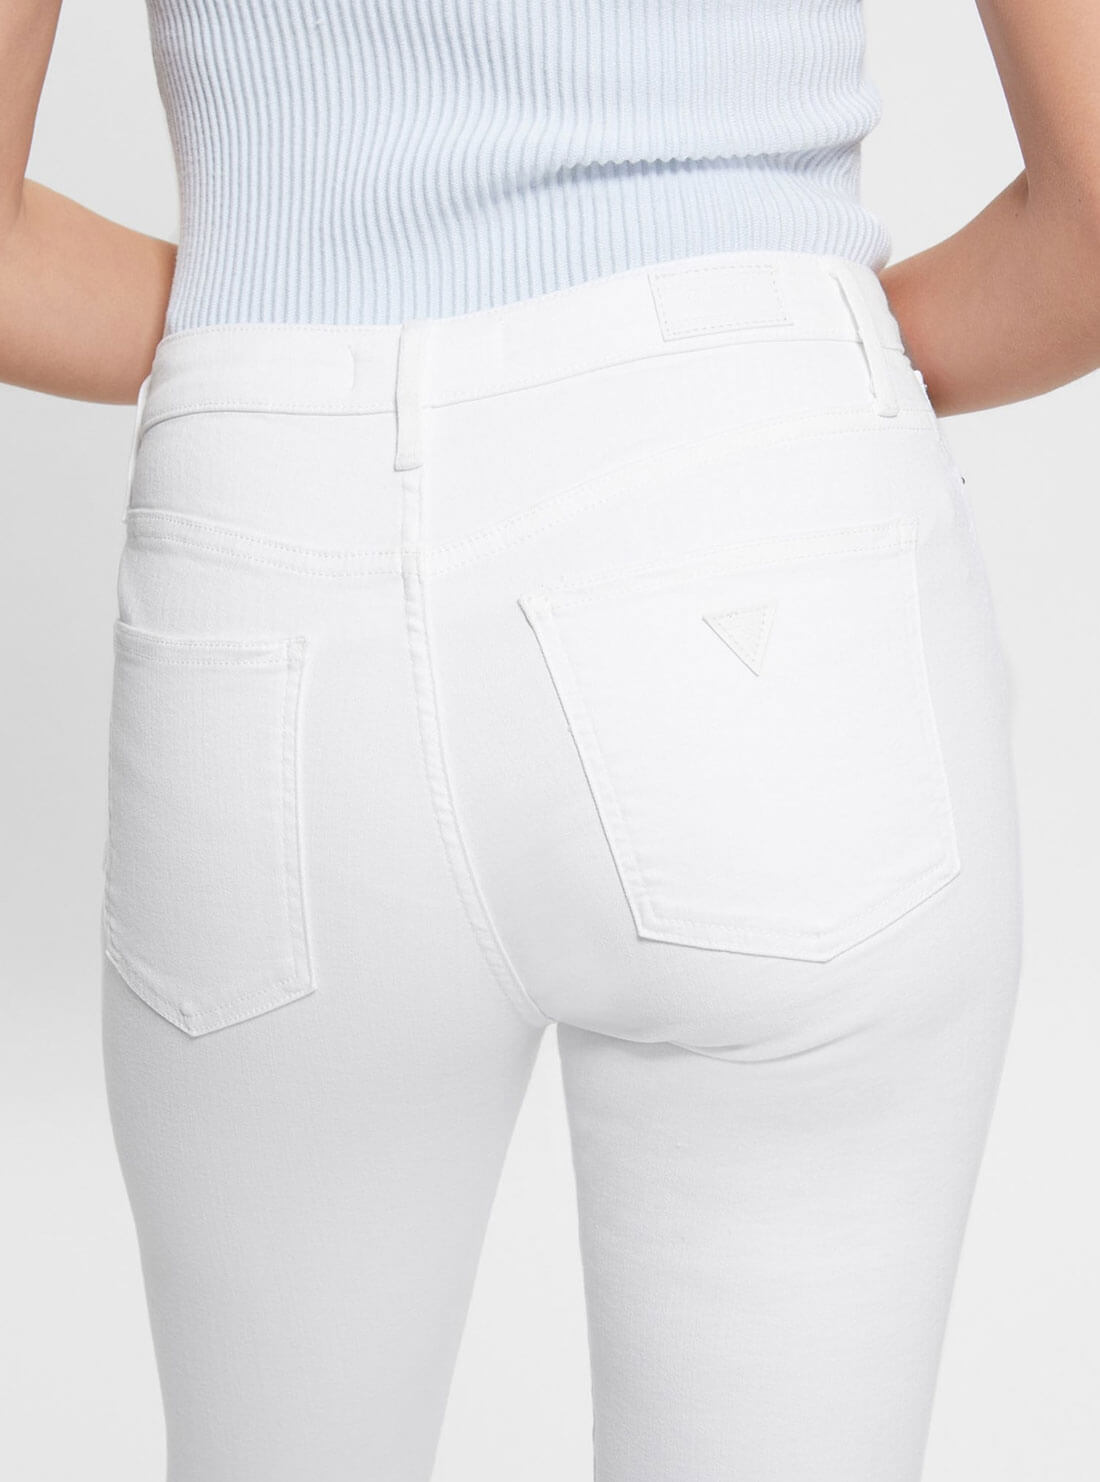  High-Rise Sexy Flare Leg Denim Jeans In Clean White Wash | GUESS Women's Denim | back detail view